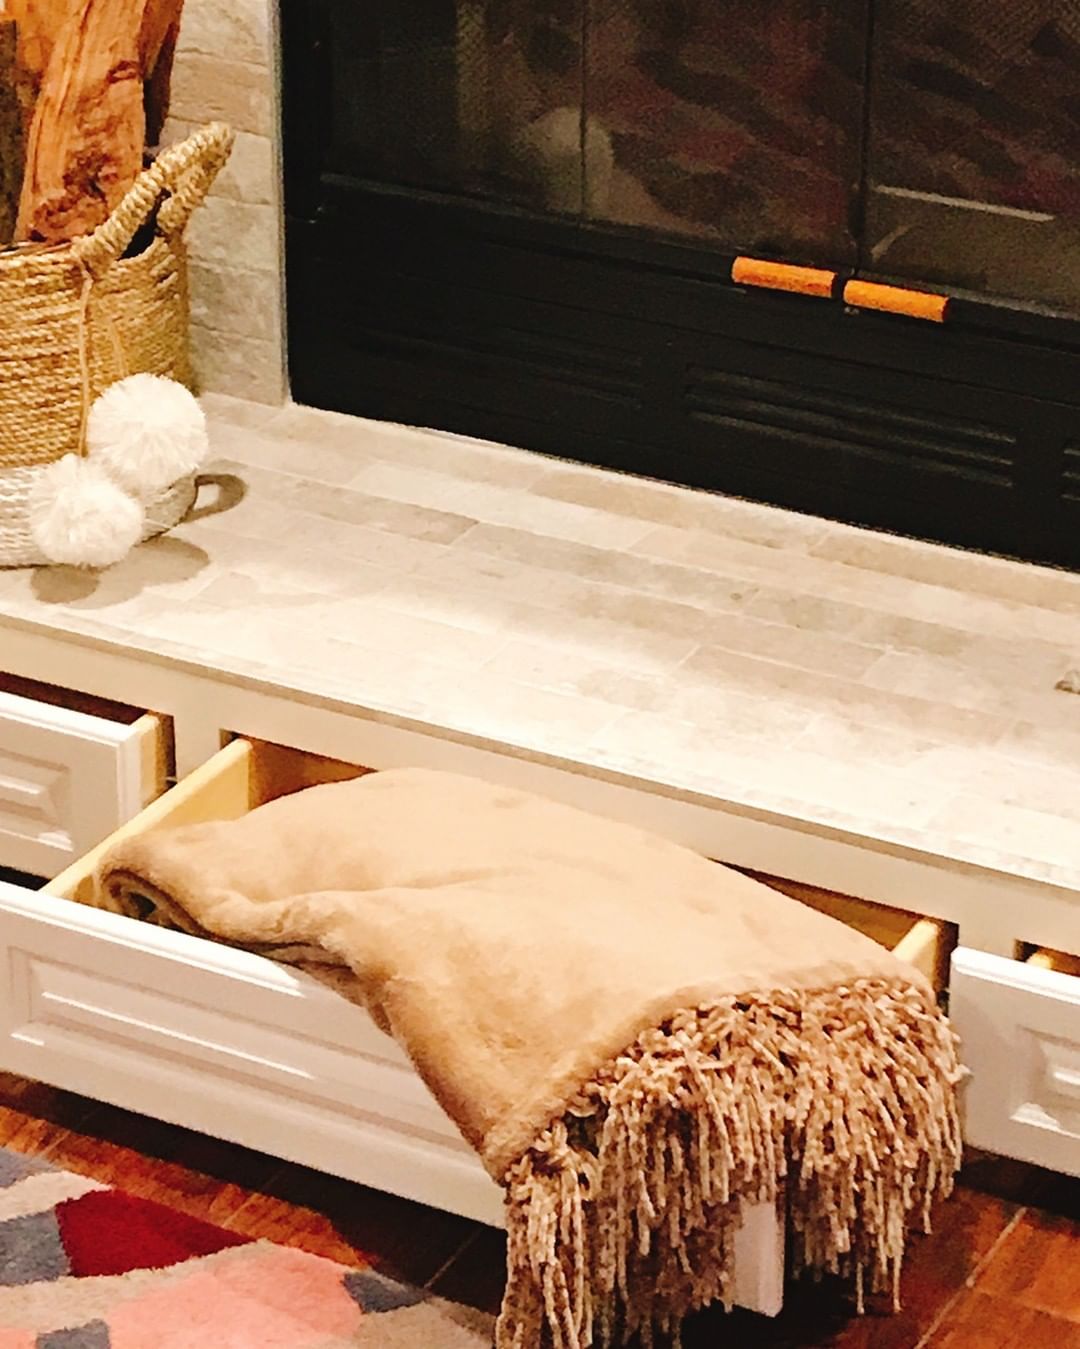 Fireplace Mantle with Built in Drawers Beneath Fireplace. Photo by Instagram user @lovedecor.homestaging